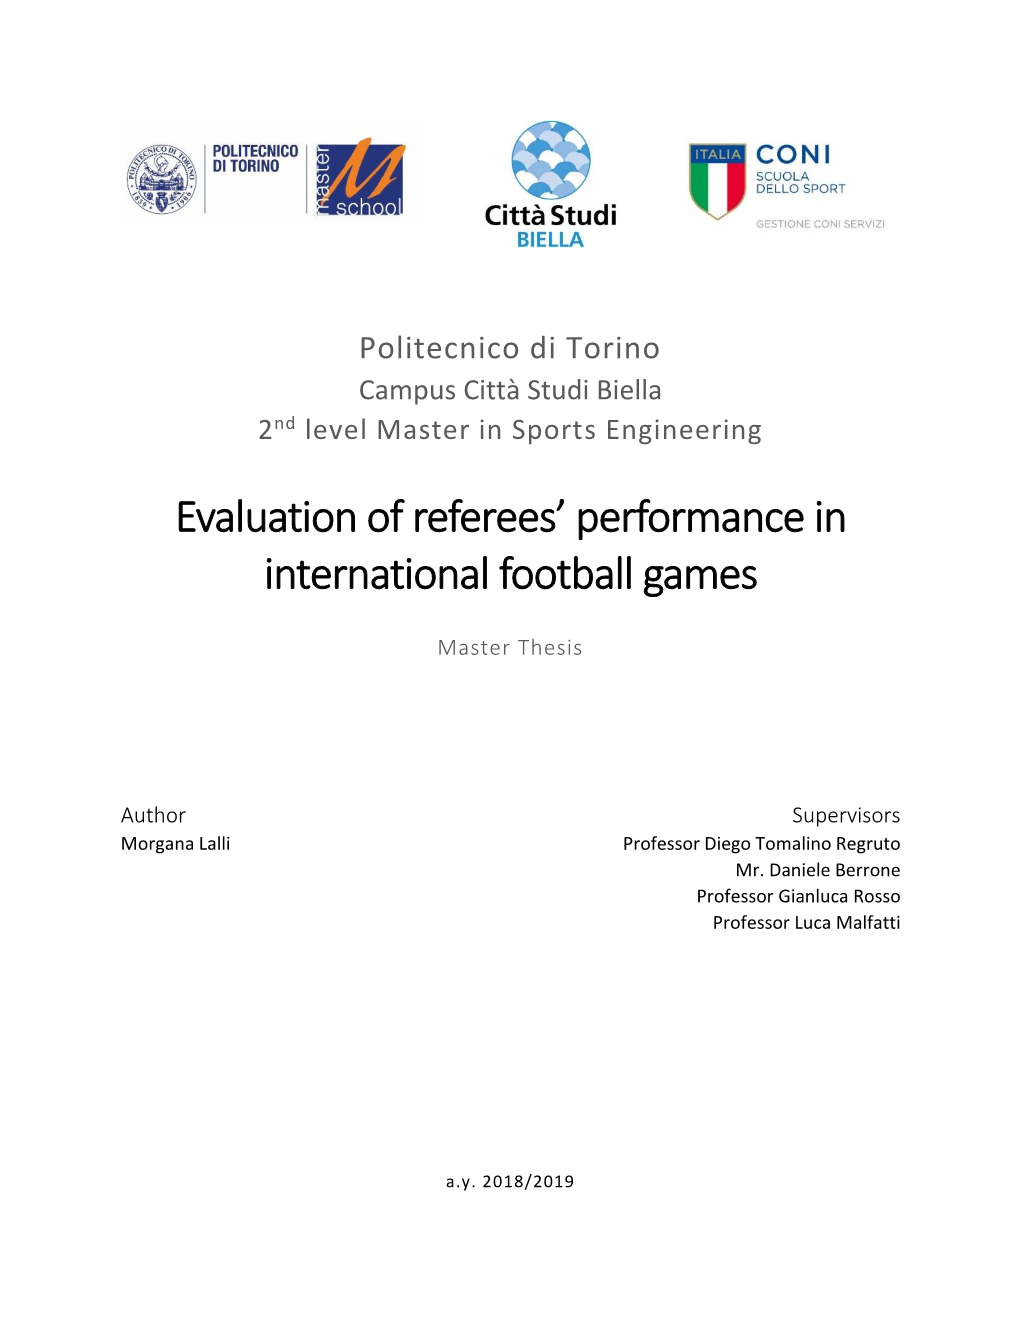 Evaluation of Referees' Performance in International Football Games